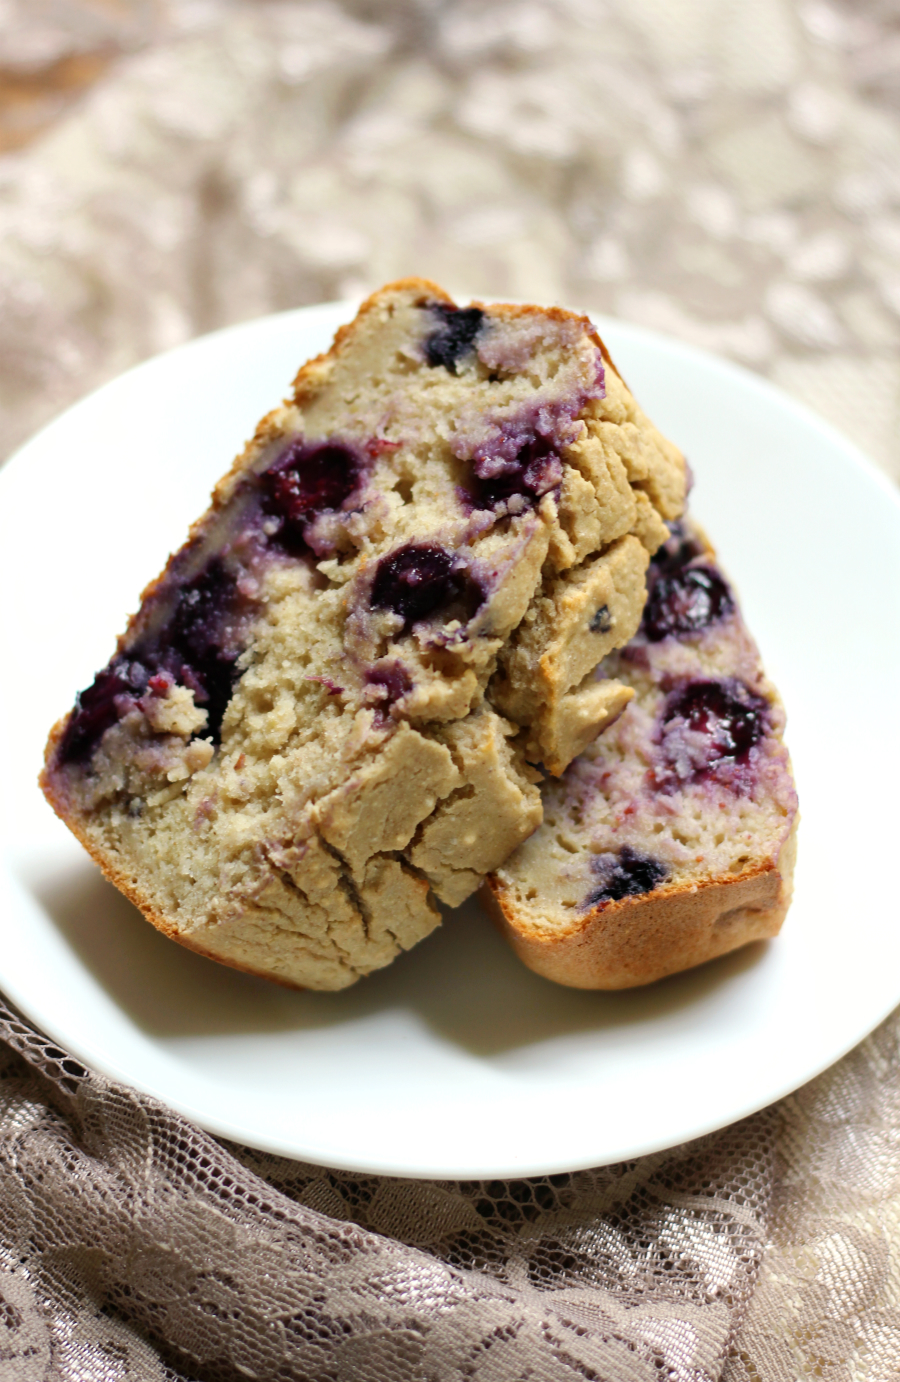 Blueberry Yogurt Banana Bread | Strength and Sunshine @RebeccaGF666 A healthy, moist, delicious, sweet quick bread! This Blueberry Yogurt Banana Bread recipe is gluten-free and vegan, packed with plump blueberries, coconut yogurt, and banana! Perfect for breakfast, brunch, as a snack, or dessert!